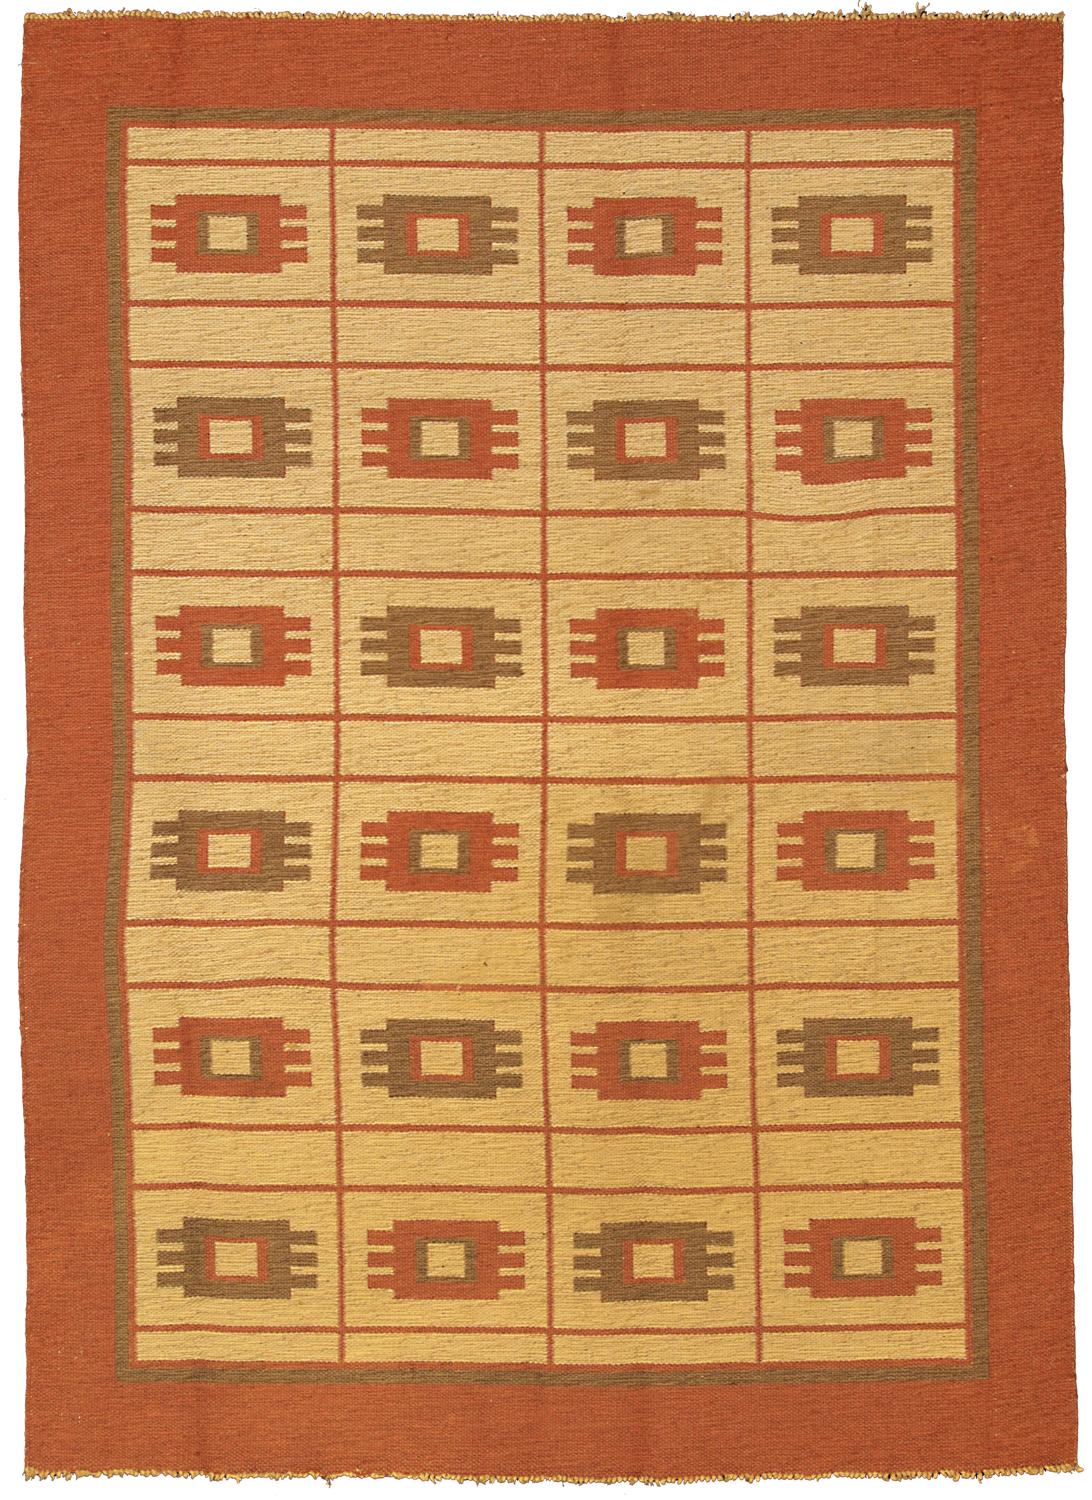 This is a mid-century Swedish kilim woven circa circa 1950 and it measures 230 X 166 CM. It features an interesting double face design and a nice geometric shapes. This fabulous kilim is a perfect example of the best principles of northern style -